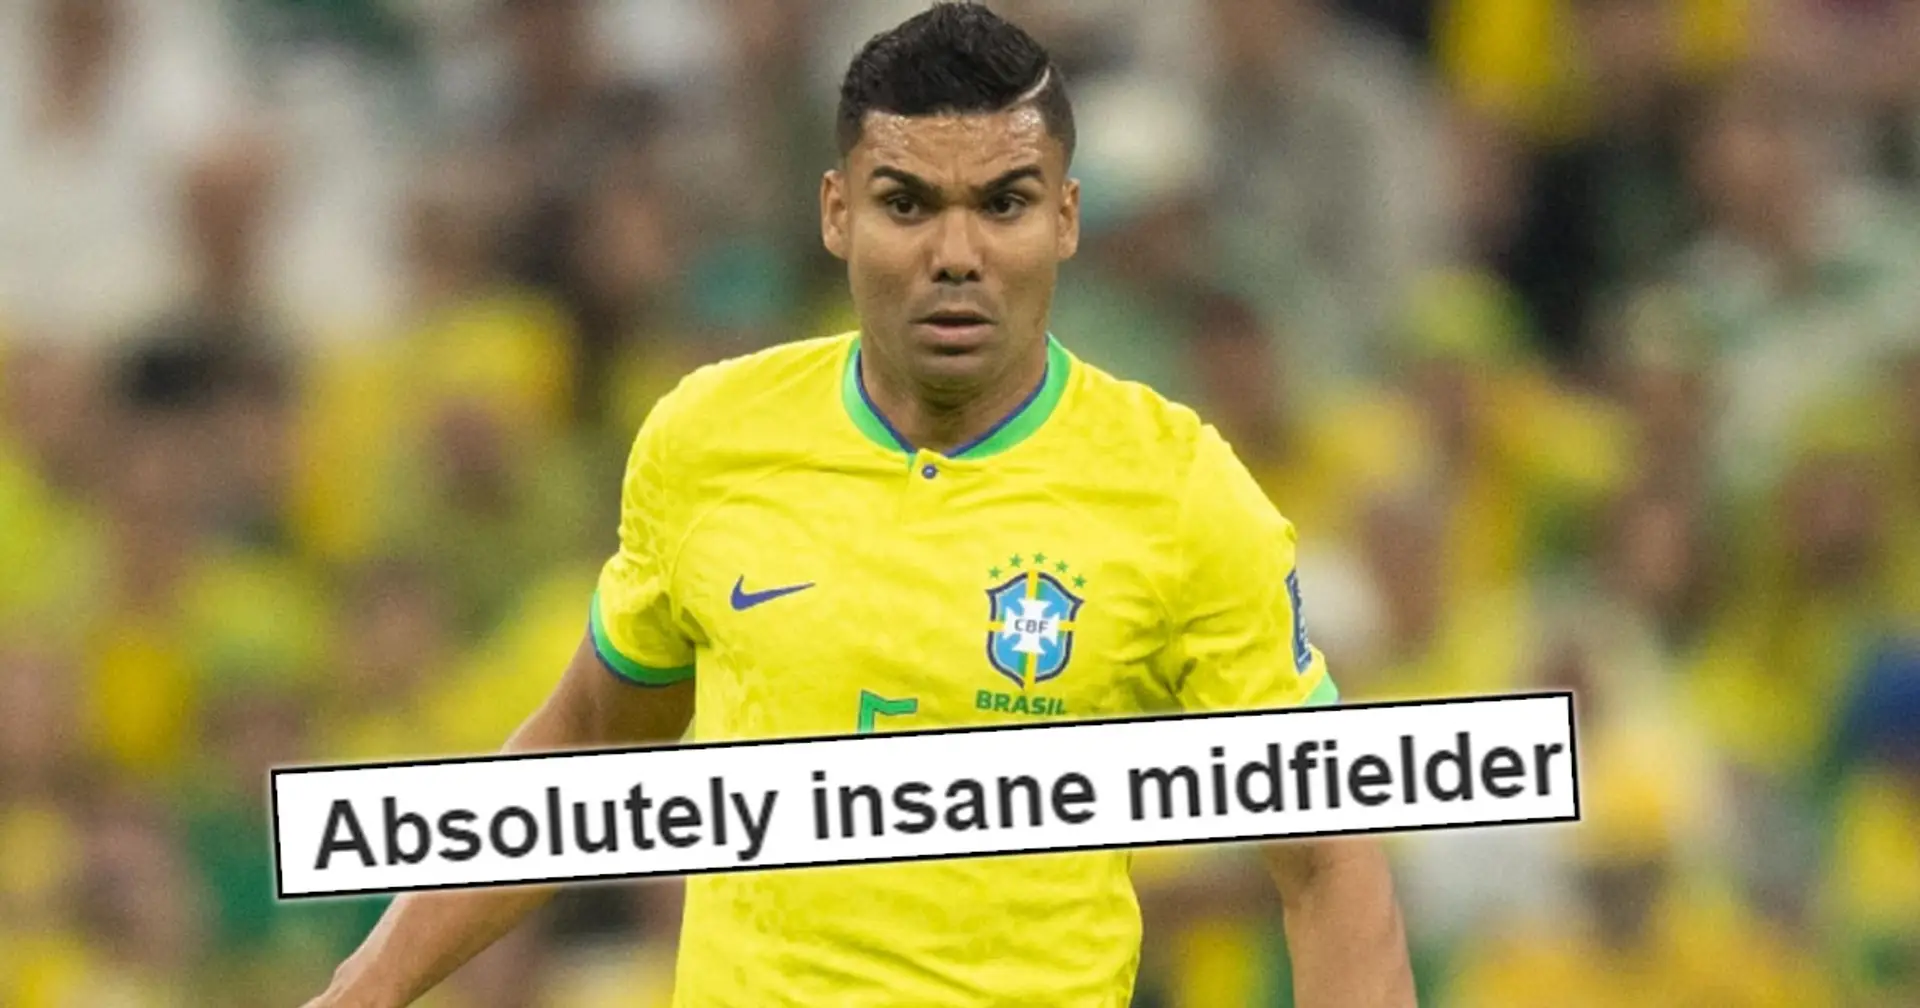 'He's immense': Man United fans react to Casemiro running the show for Brazil in Serbia win